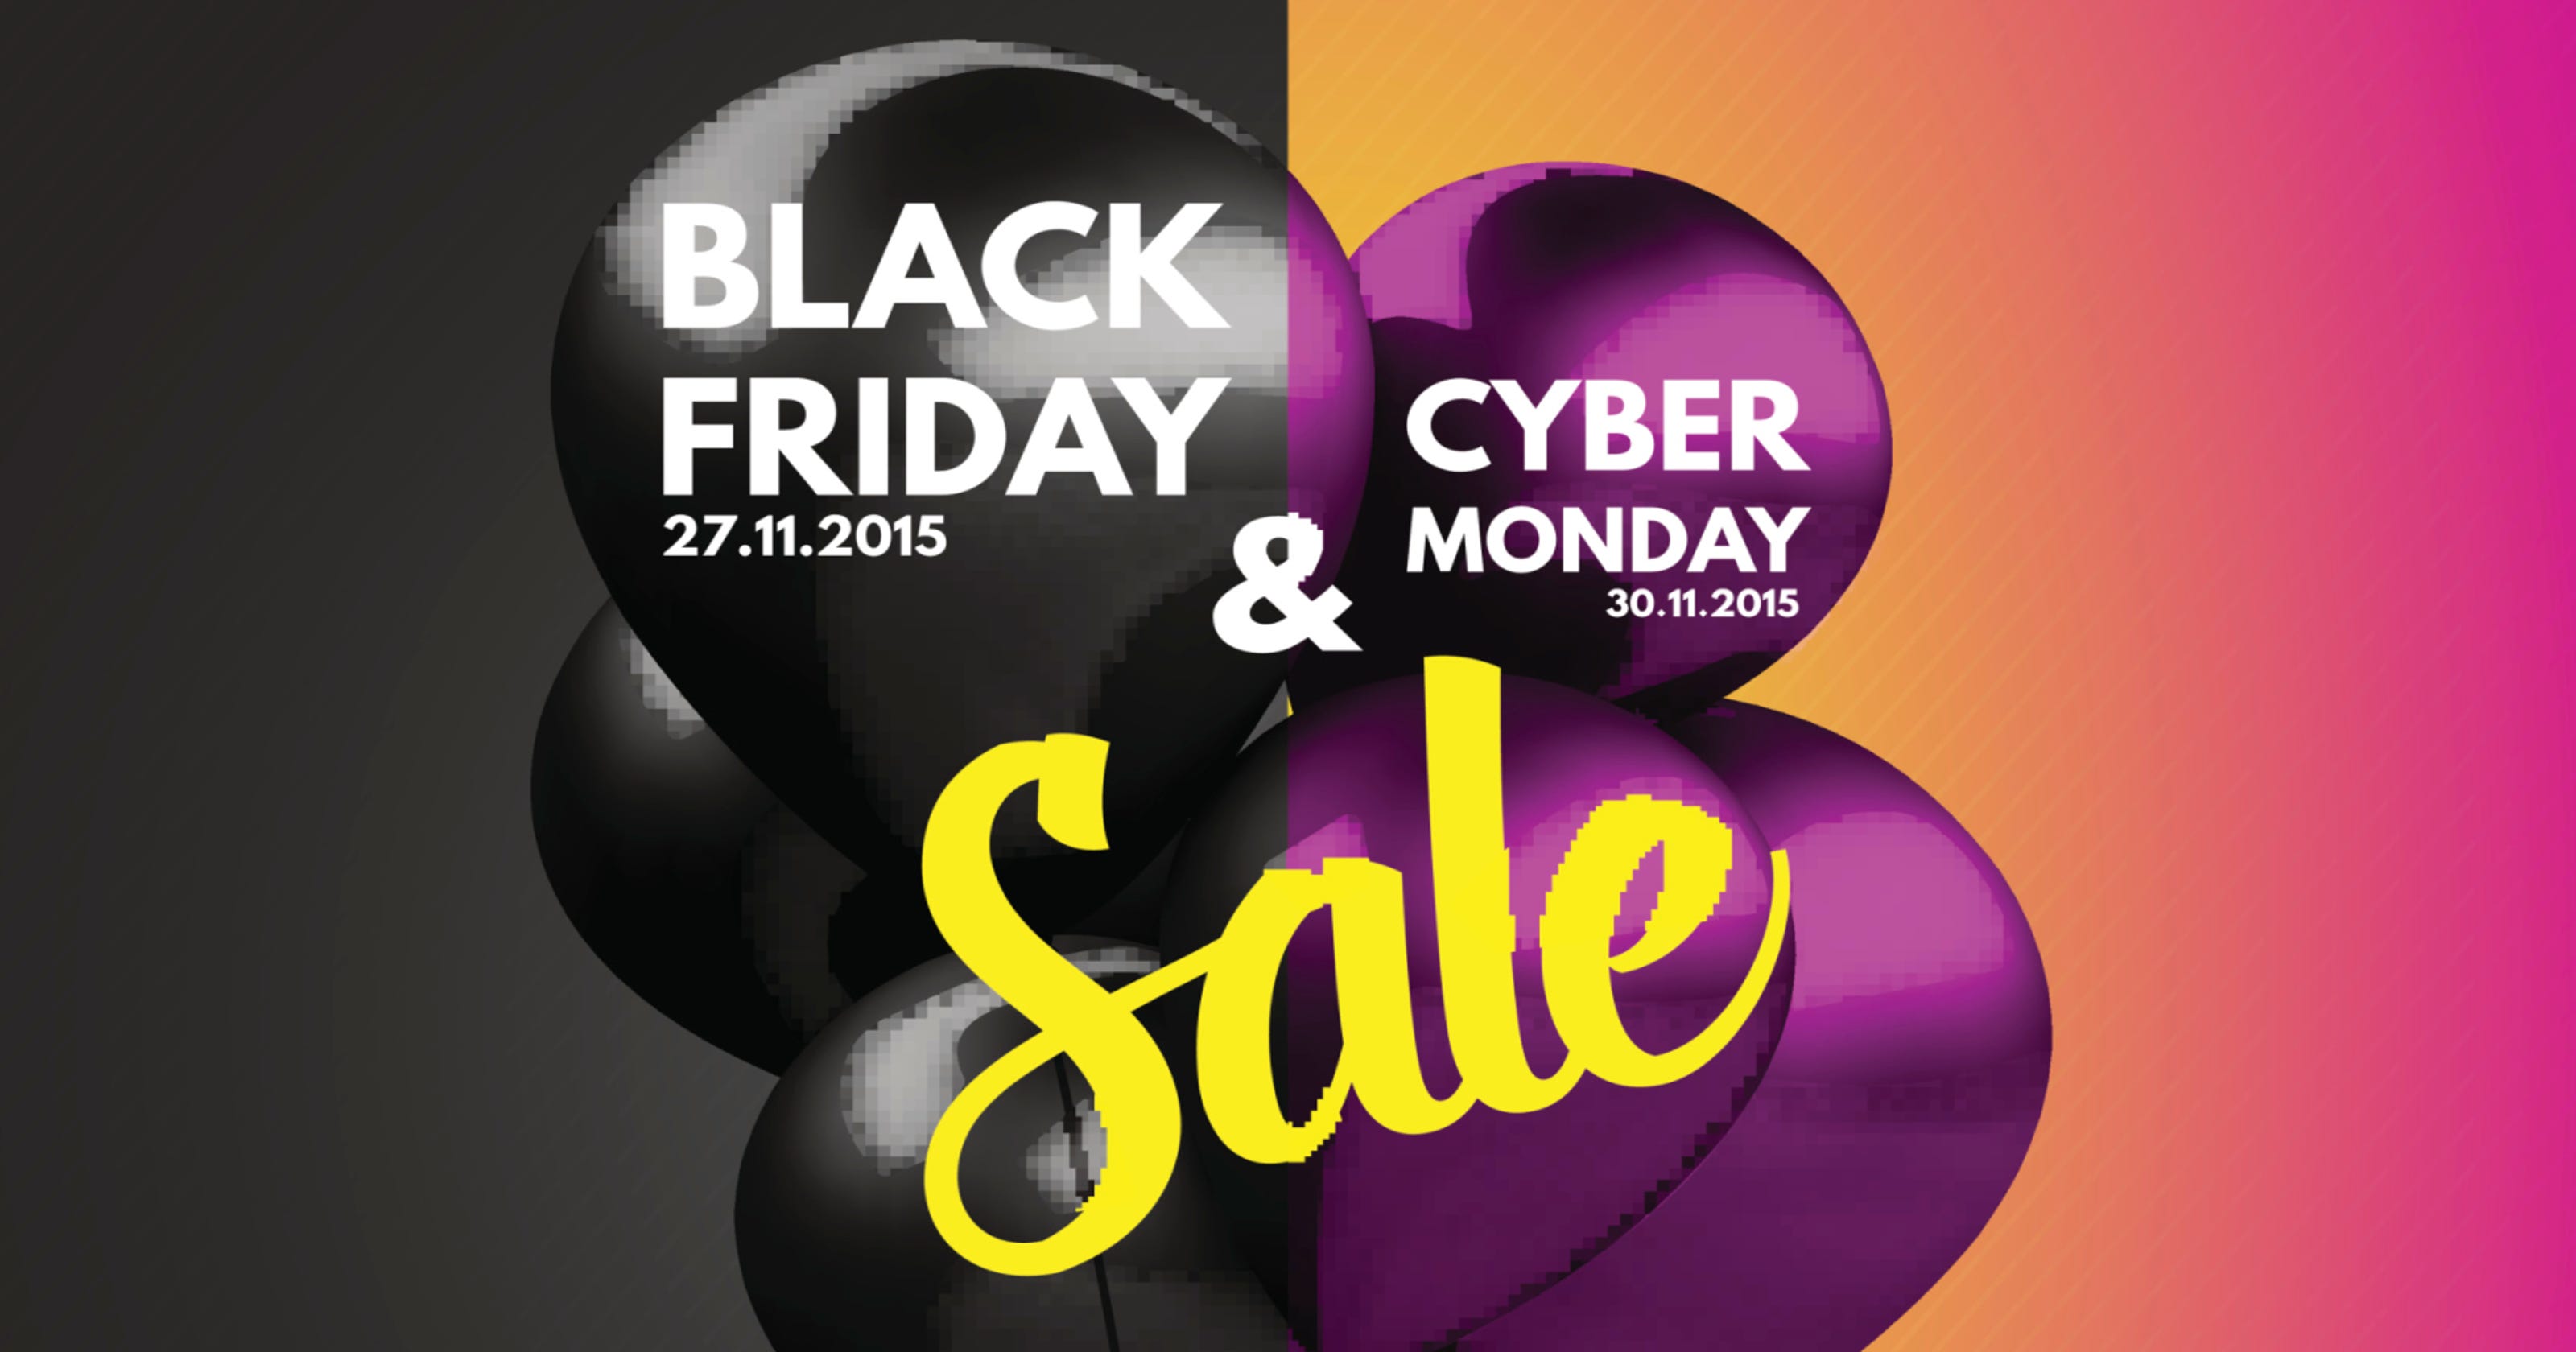 Black Friday vs. Cyber Monday: Which is better?